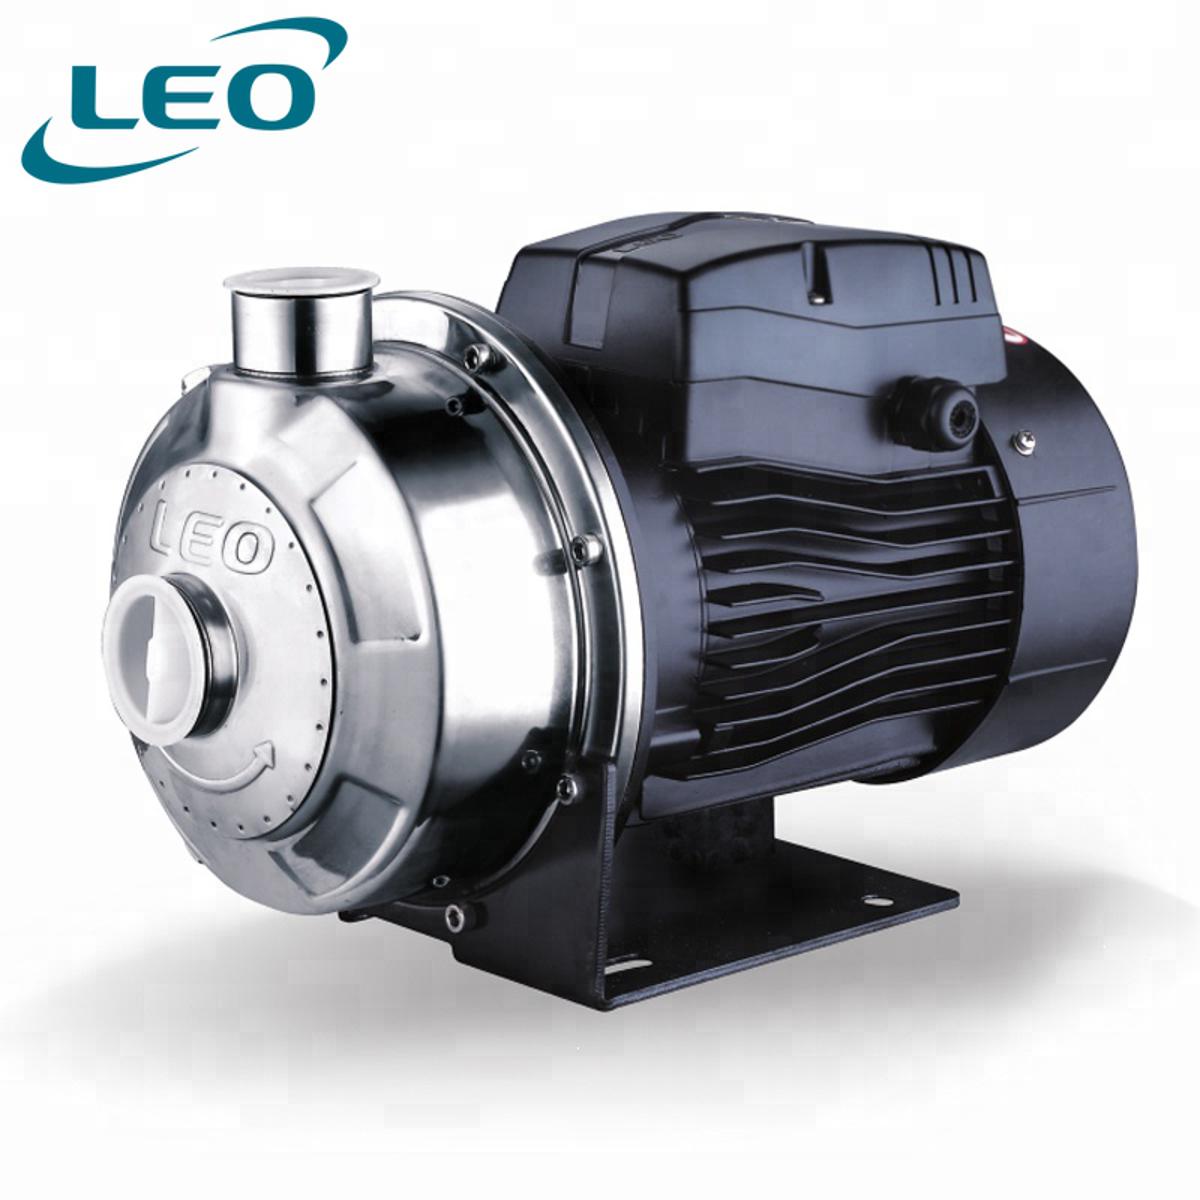 LEO - AMS-70-0.75 - 750W - 1.0 HP - Stainless Steel Centrifugal Pump- 380V~400V THREE PHASE- SIZE:- 1 1-4 " X 1"- ITALY Patent DESIGN European STANDARD